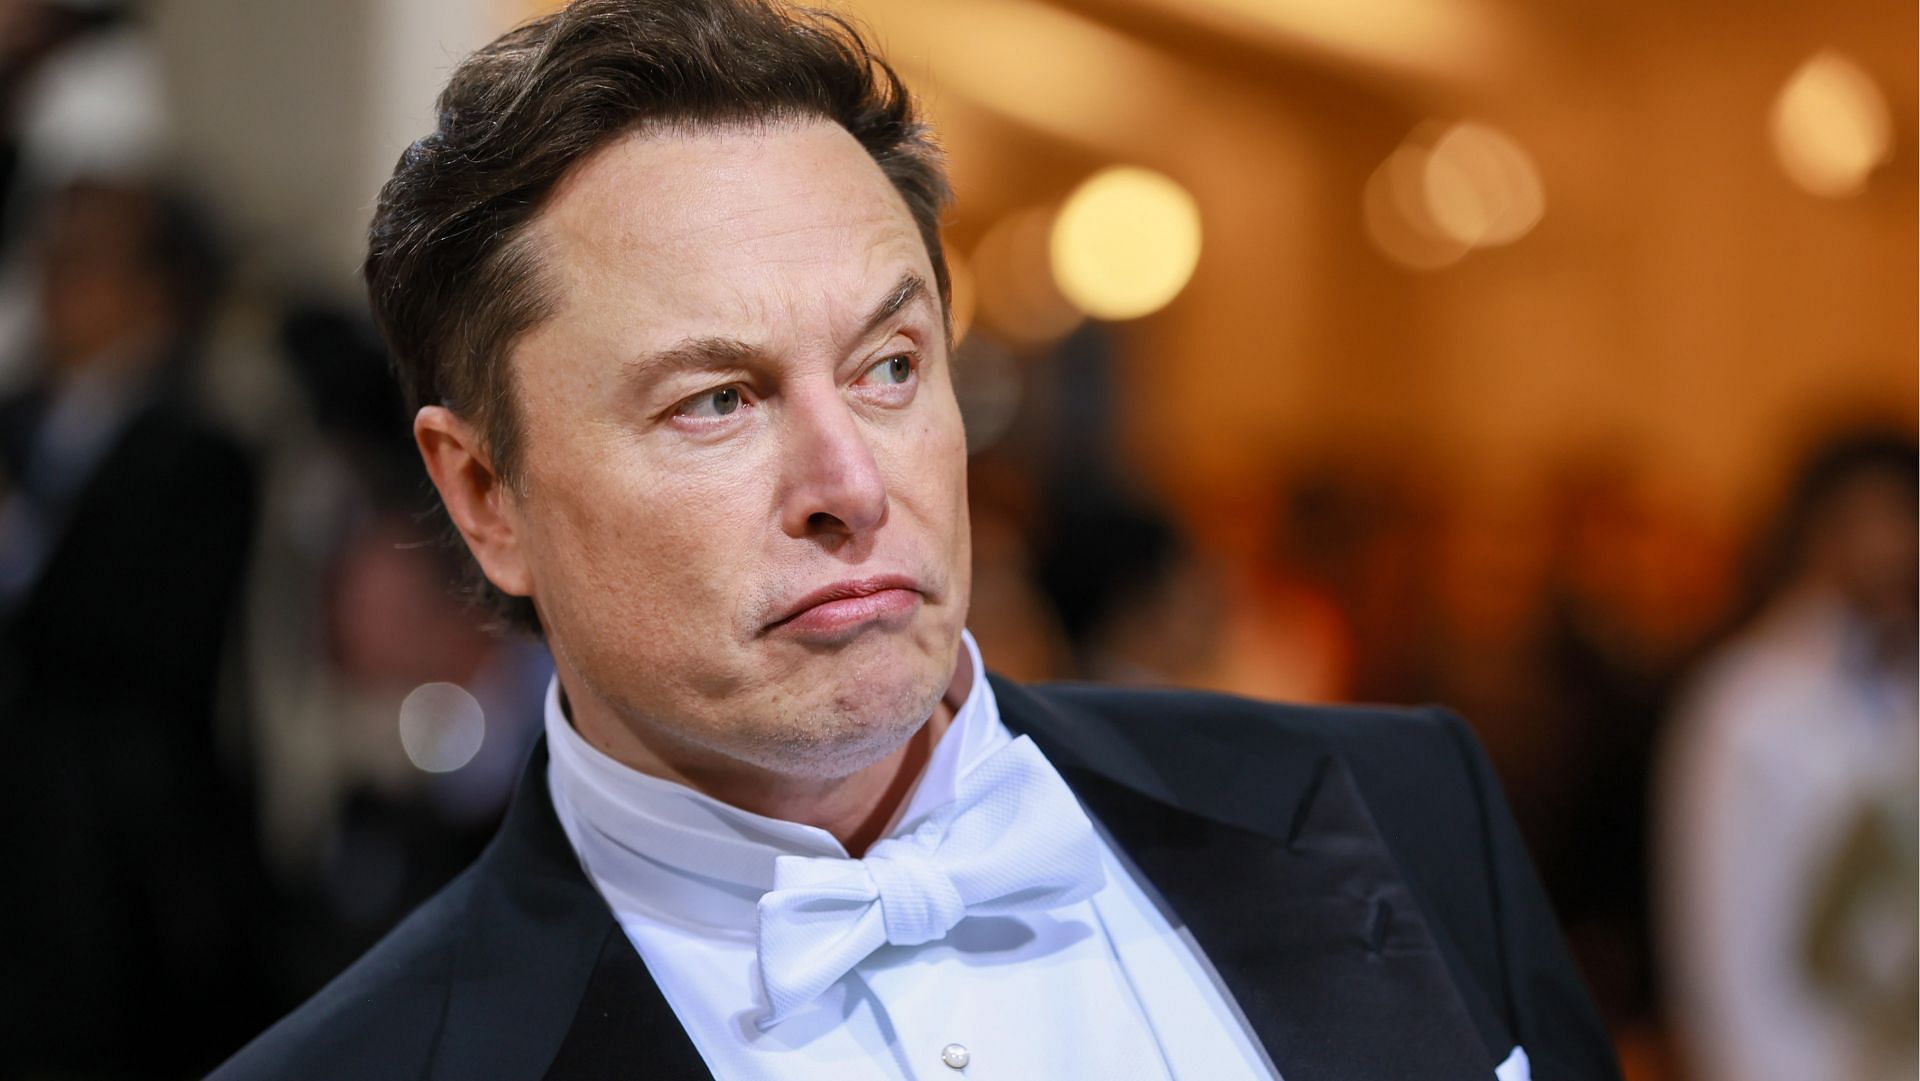 Elon Musk got booed at Dave Chappelle